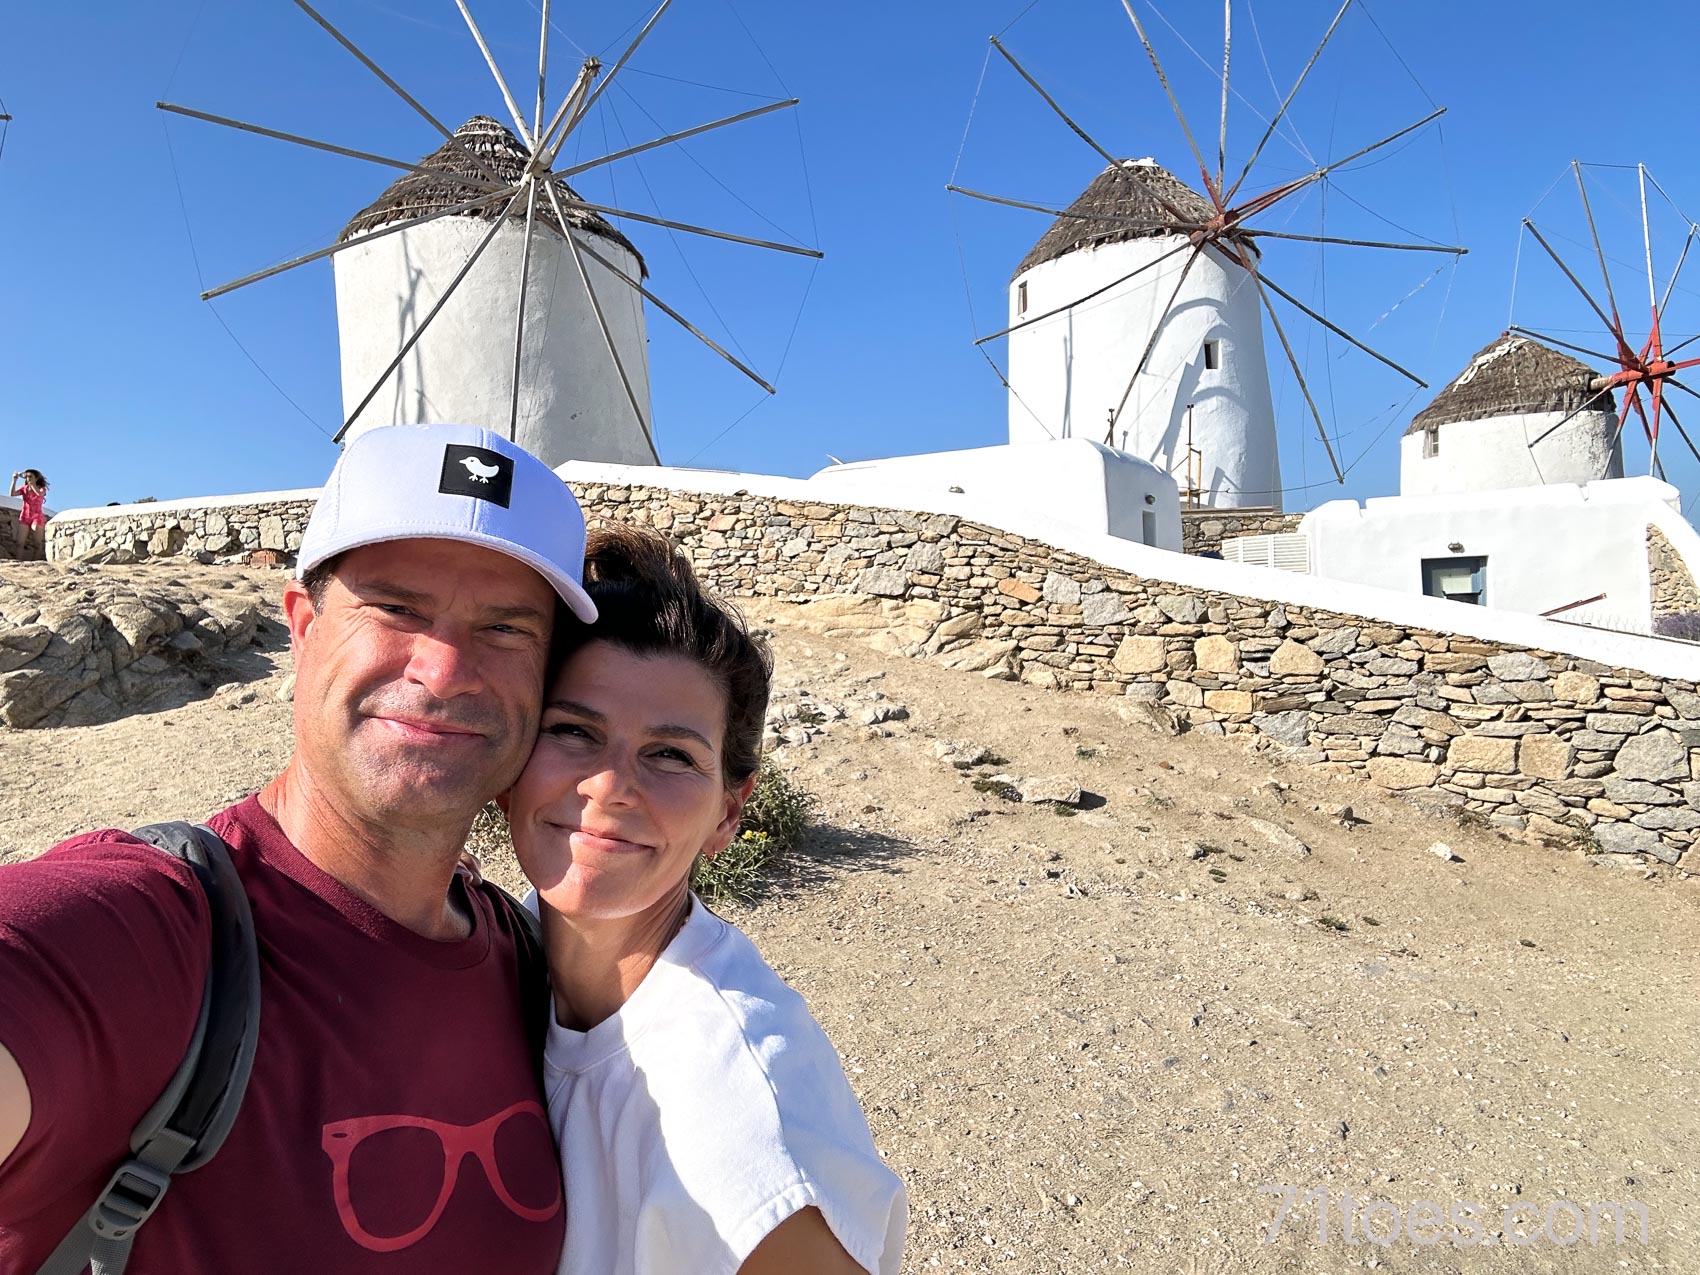 Shawni and David at the windmills in Mykonos